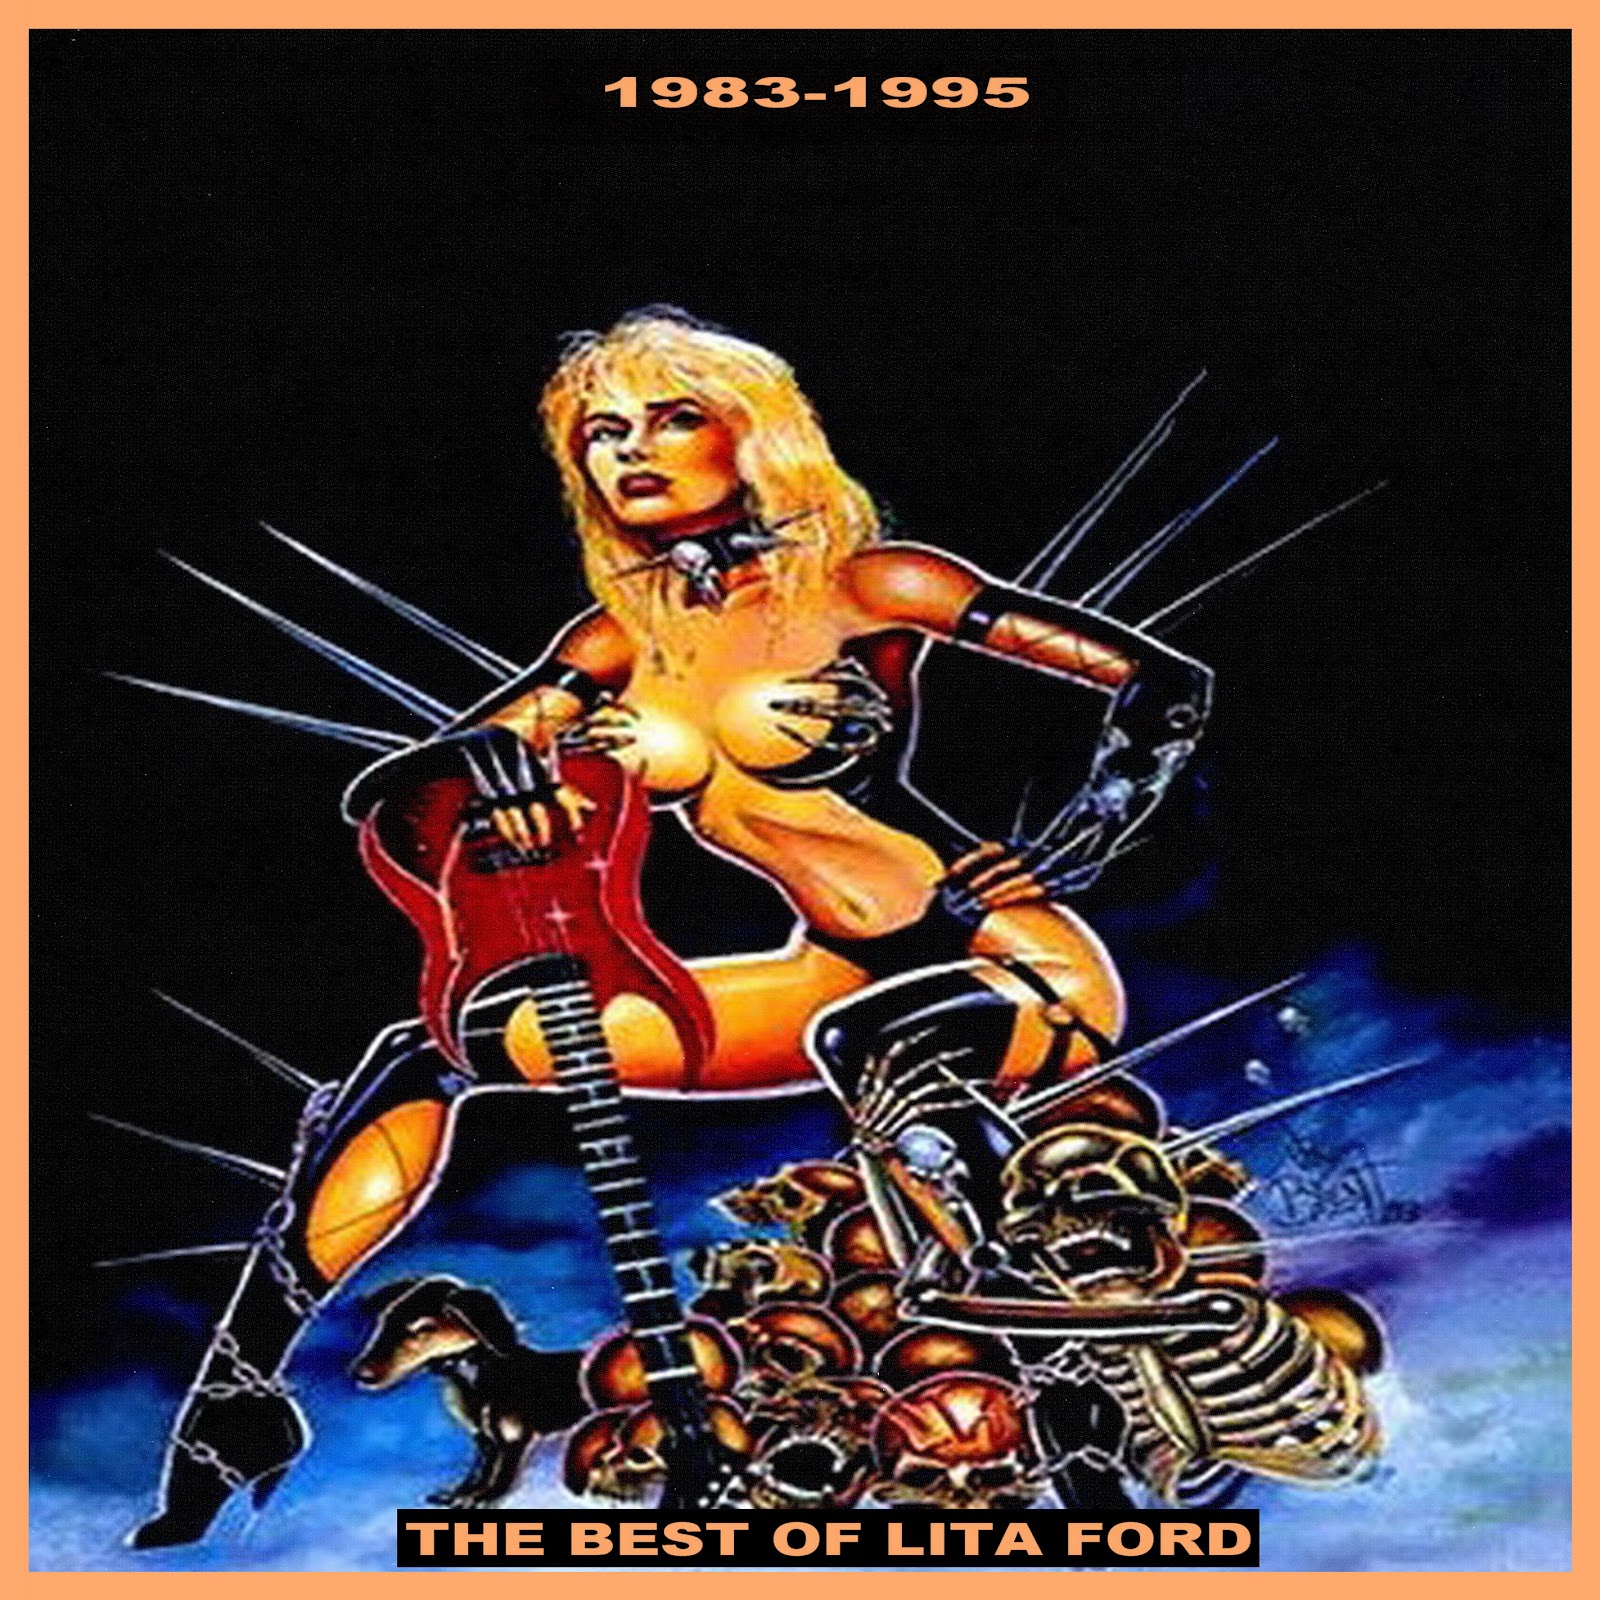 LITA FORD - The Best Of Lita Ford 1983-1995.